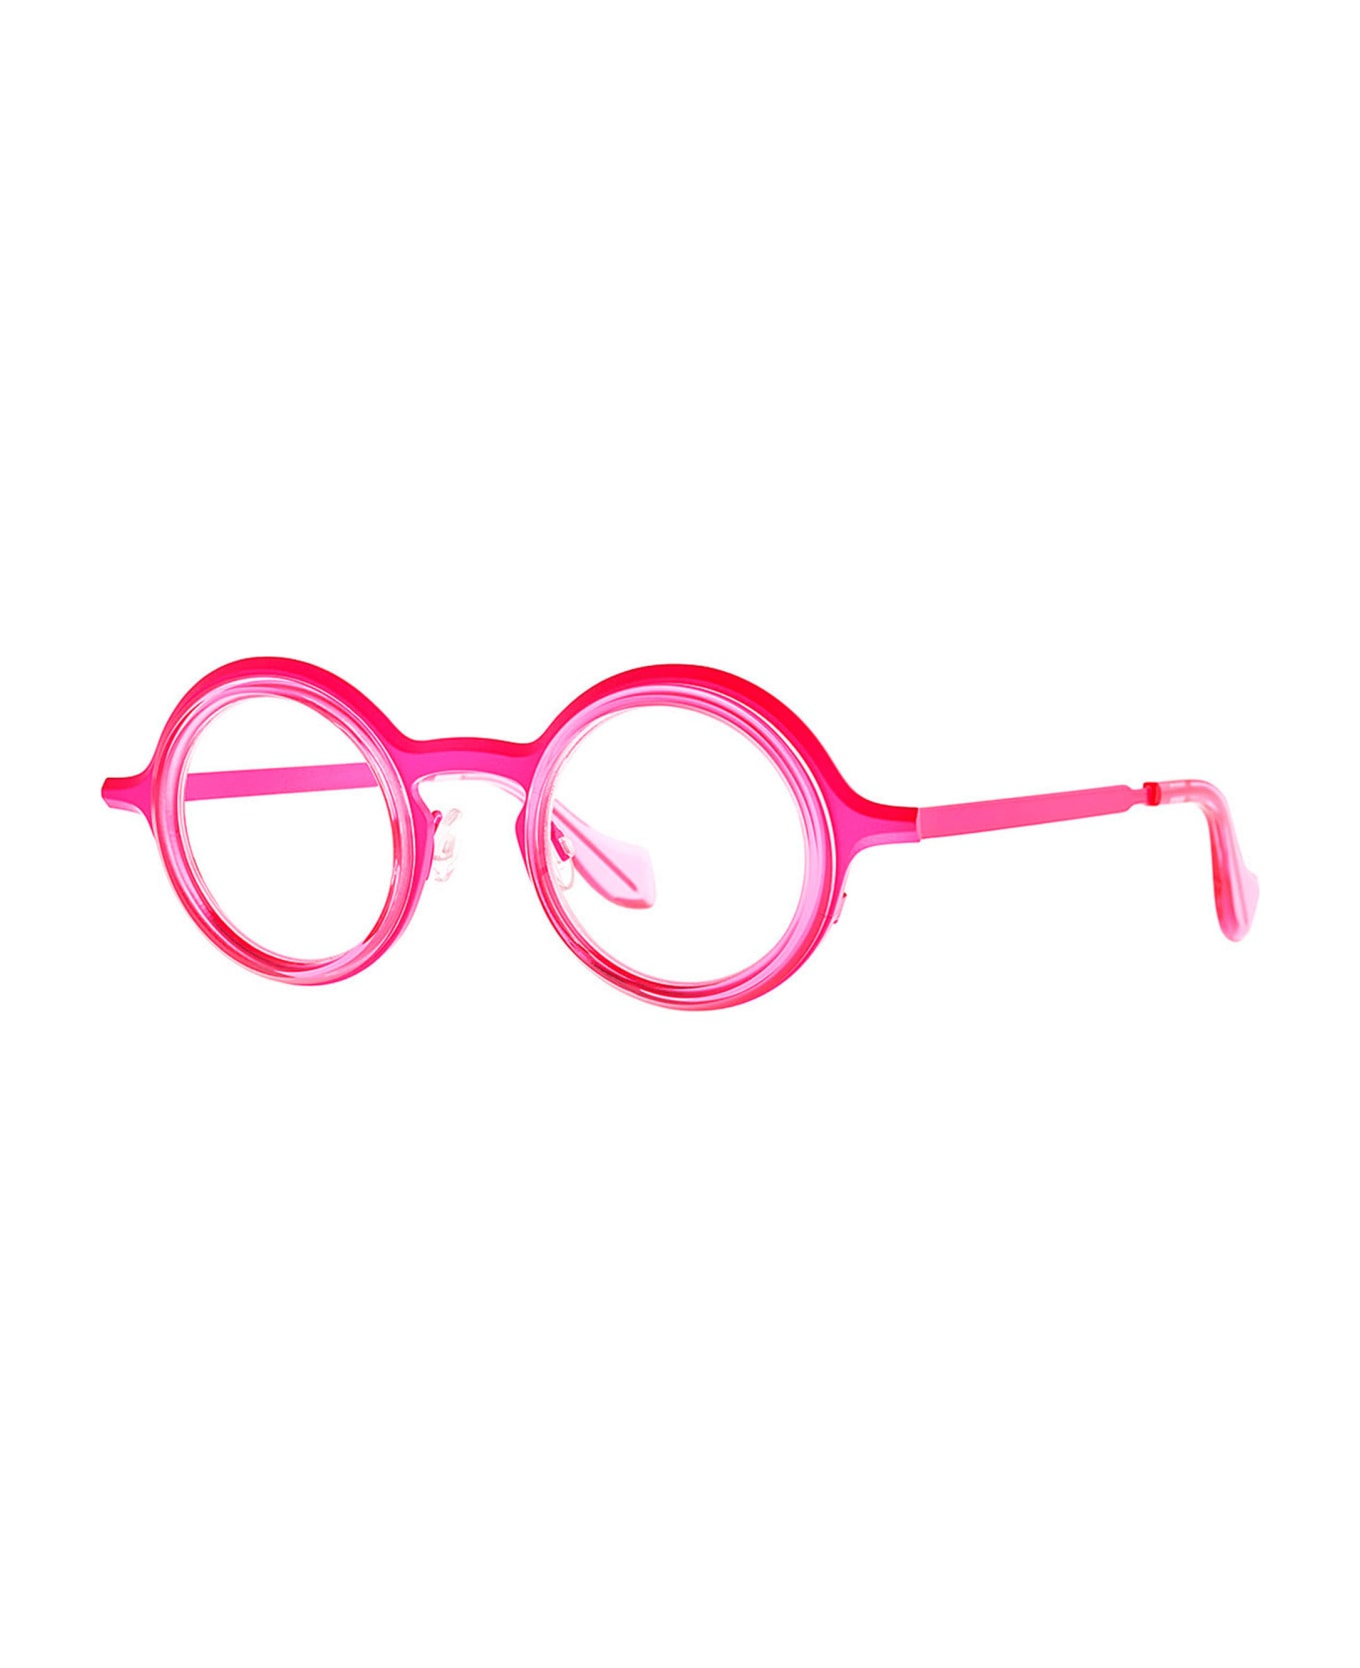 Theo Eyewear Cabochon - 013 Fluo Pink Rx Glasses - pink